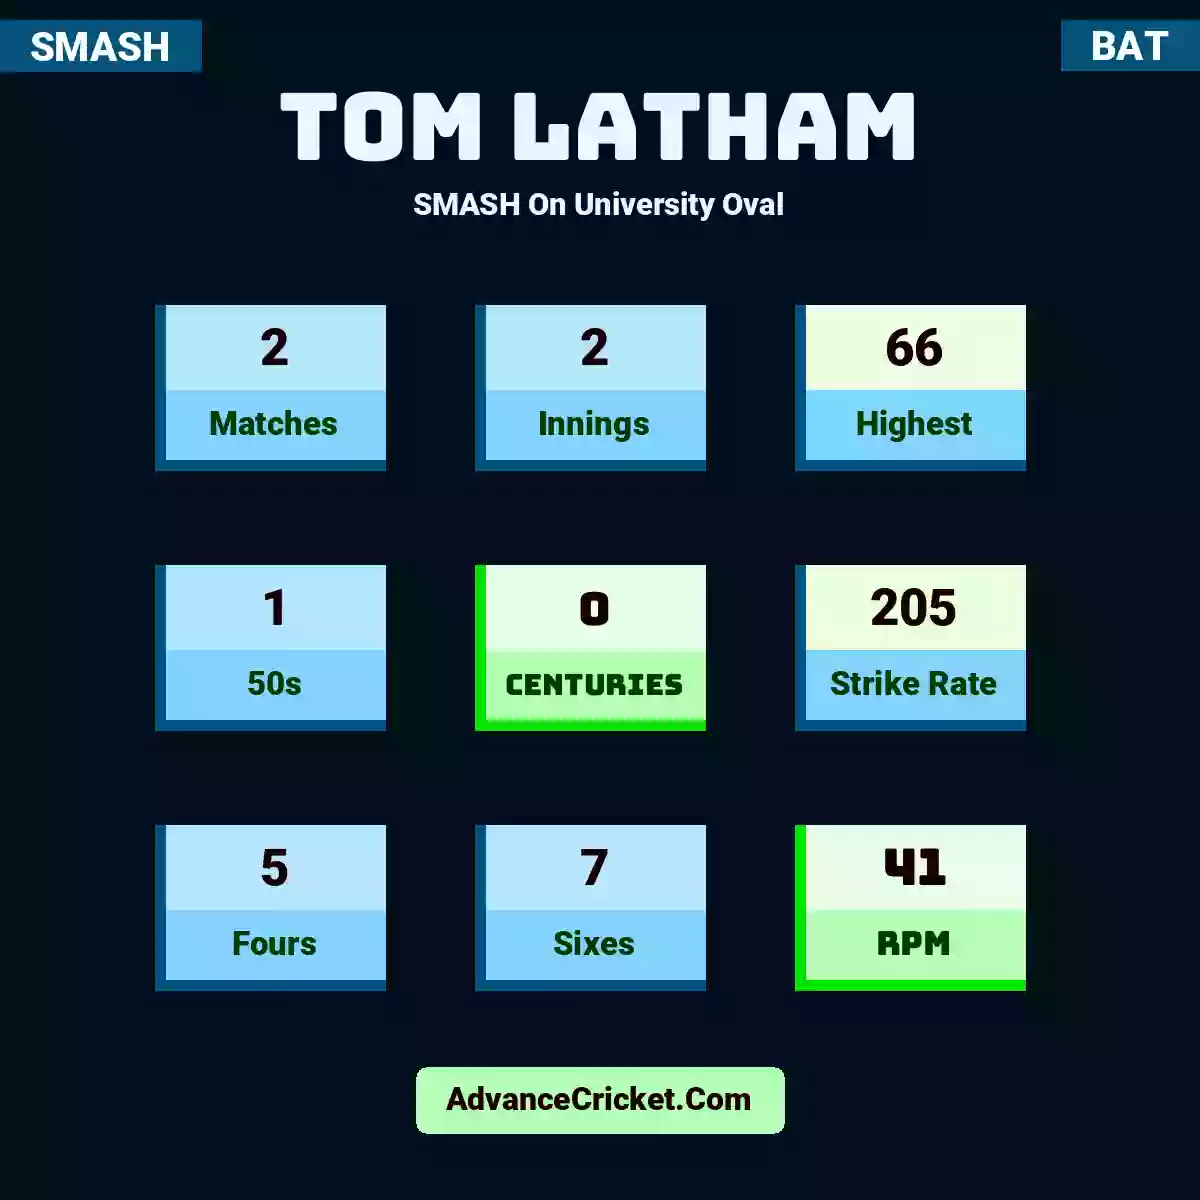 Tom Latham SMASH  On University Oval, Tom Latham played 2 matches, scored 66 runs as highest, 1 half-centuries, and 0 centuries, with a strike rate of 205. T.Latham hit 5 fours and 7 sixes, with an RPM of 41.